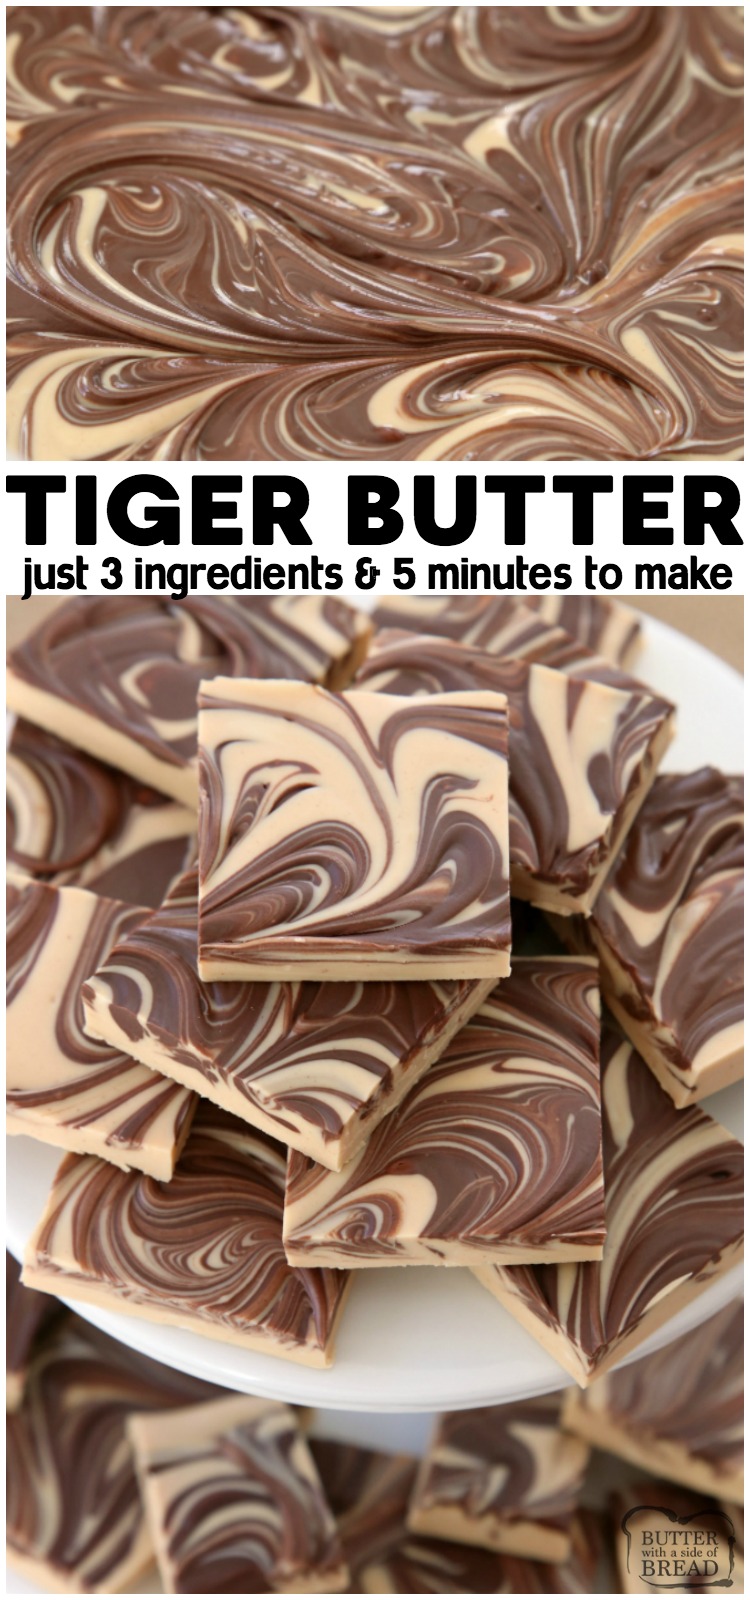 Tiger Butter made from 3 ingredients that are melted & swirled together in minutes. Gorgeous holiday candy recipe with rich & creamy peanut butter chocolate flavor. #tigerbutter #peanutbutter #chocolate #fudge #candy #Christmas #holidays #recipe #dessert from BUTTER WITH A SIDE OF BREAD